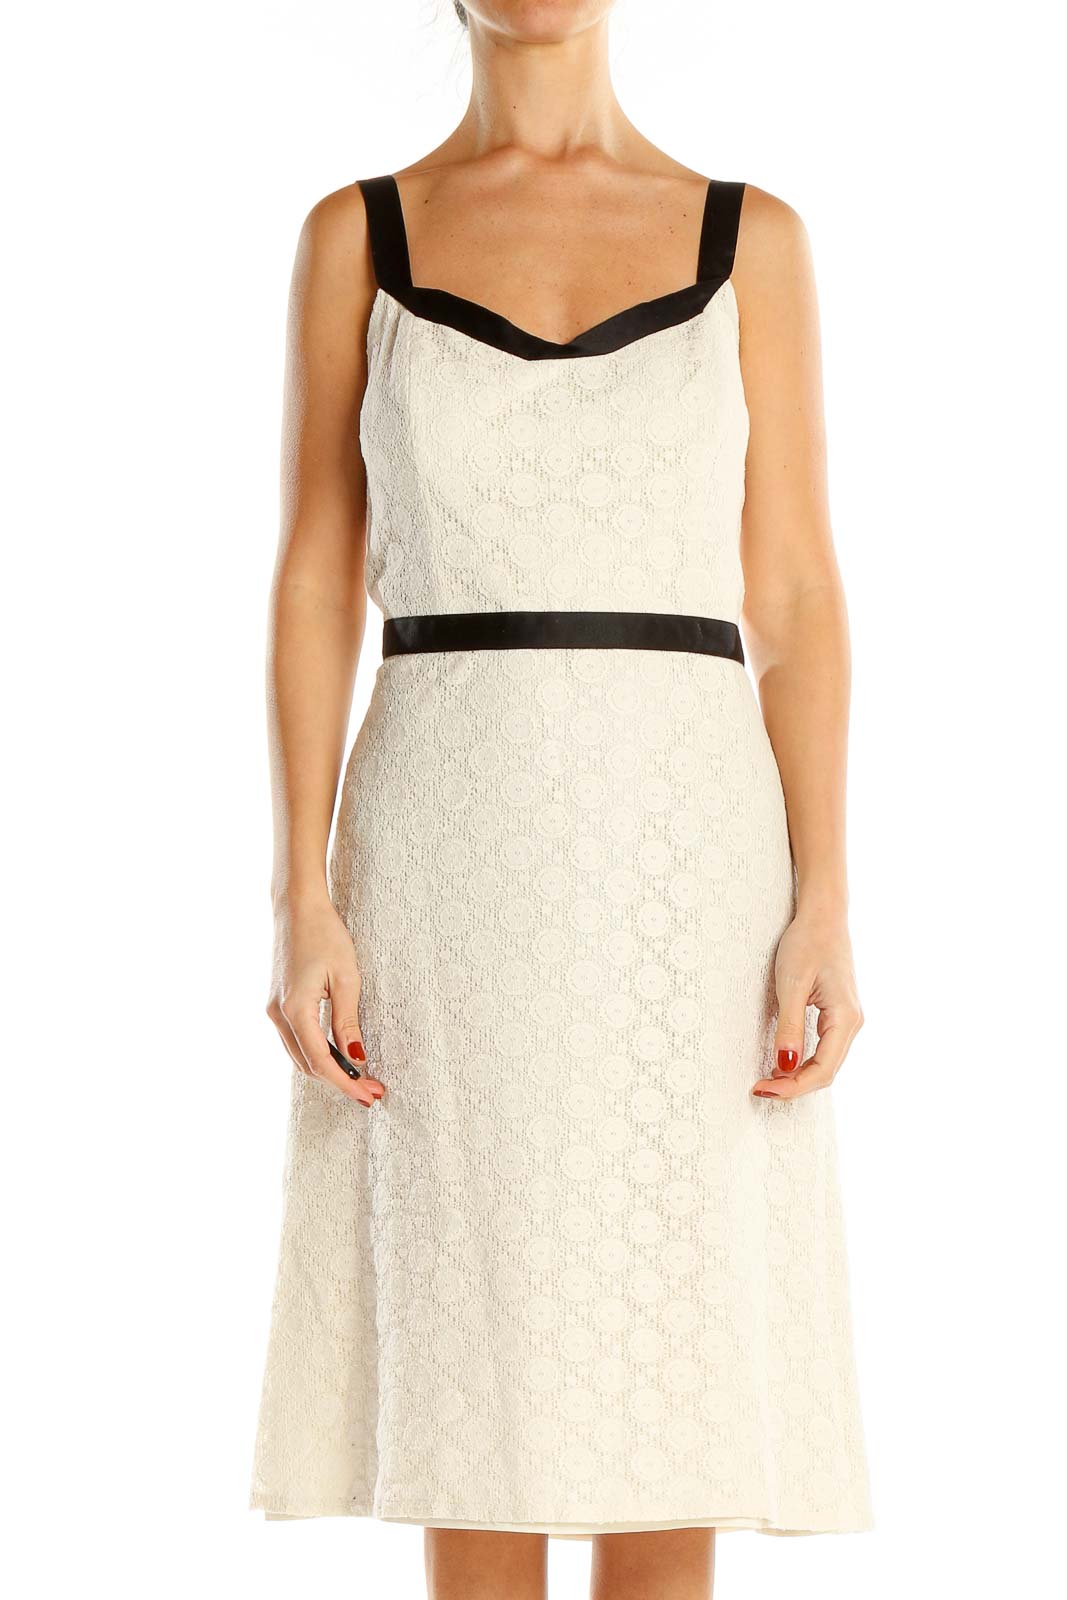 Cream Black Lace Classic Fit & Flare Dress Front